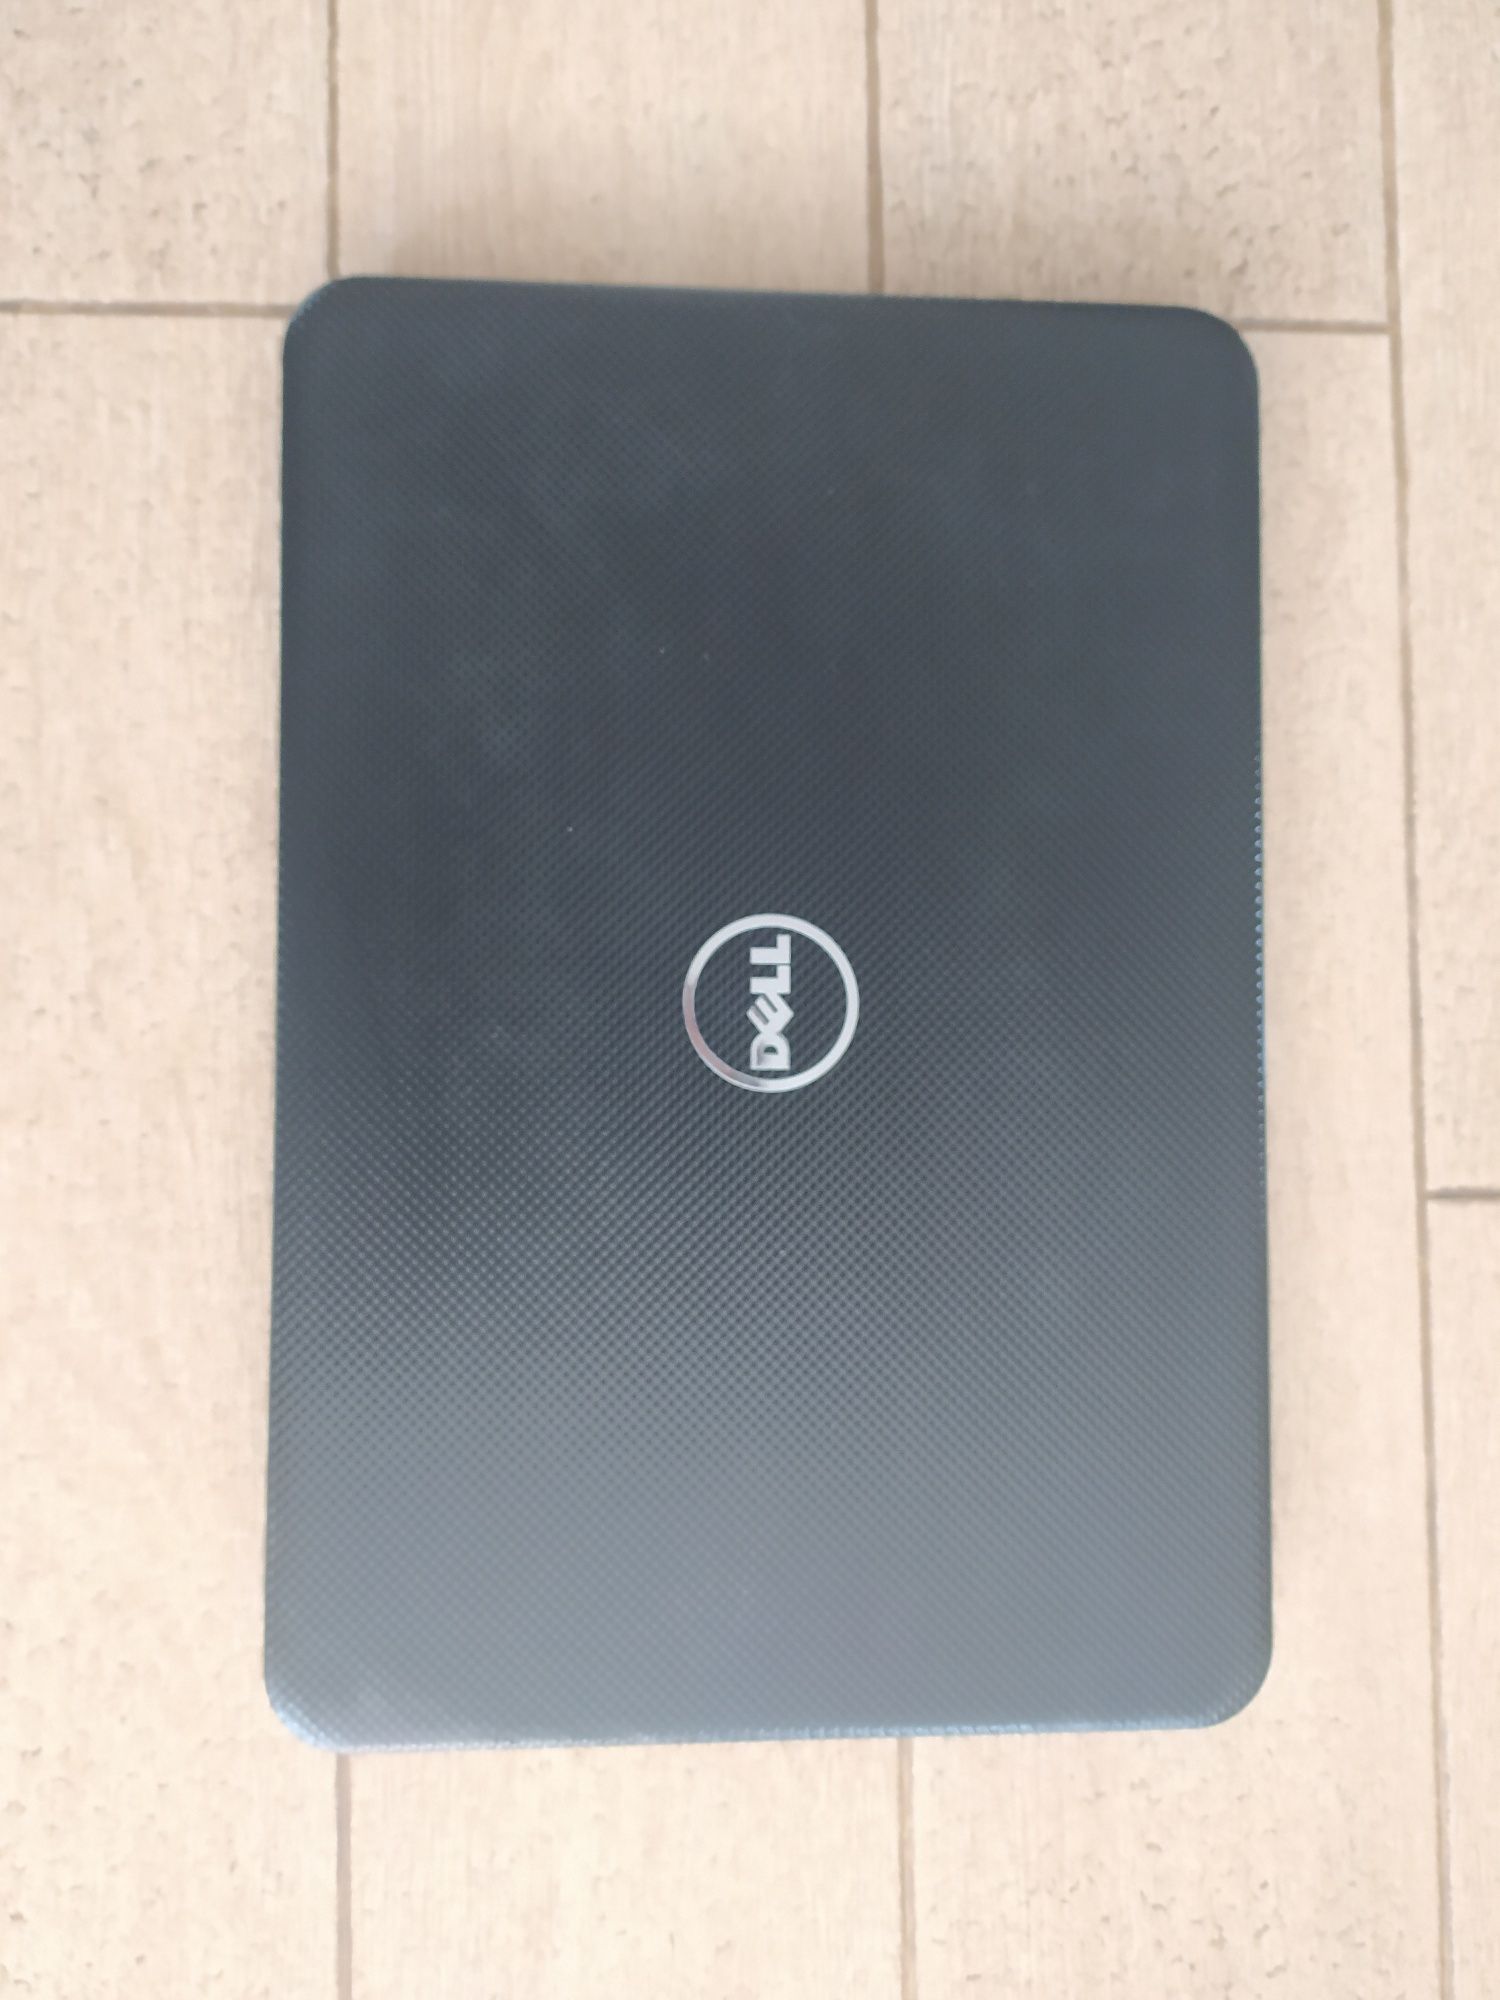 Notebook Dell Inspiron 3521